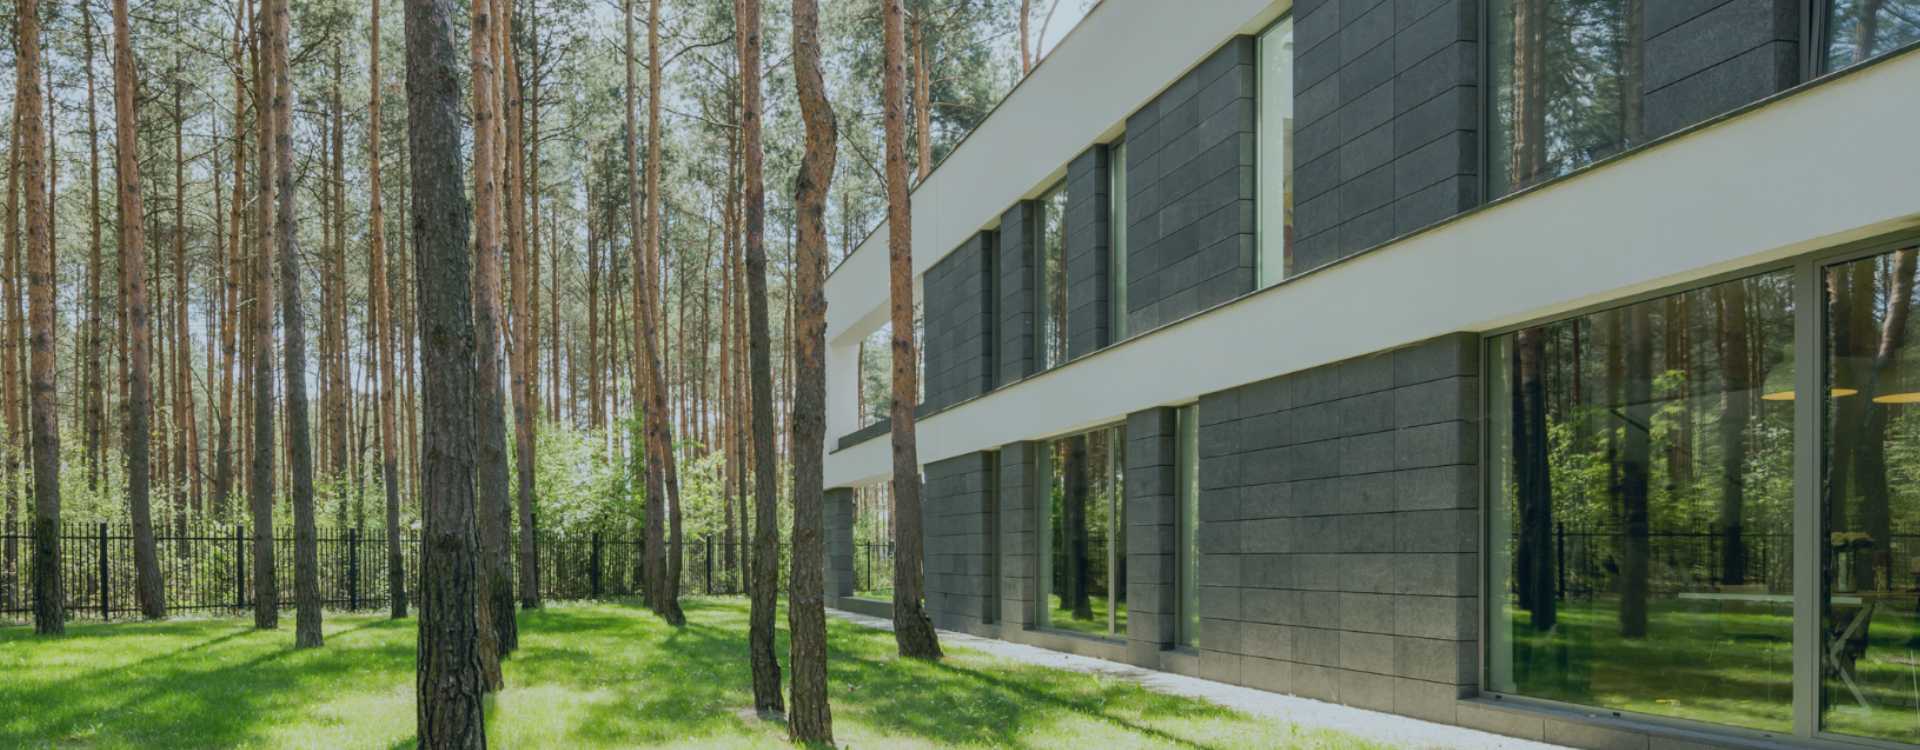 On the right side of the picture, a modern house with large windows and a fenced garden with large trees to its left can be seen standing in a forest.